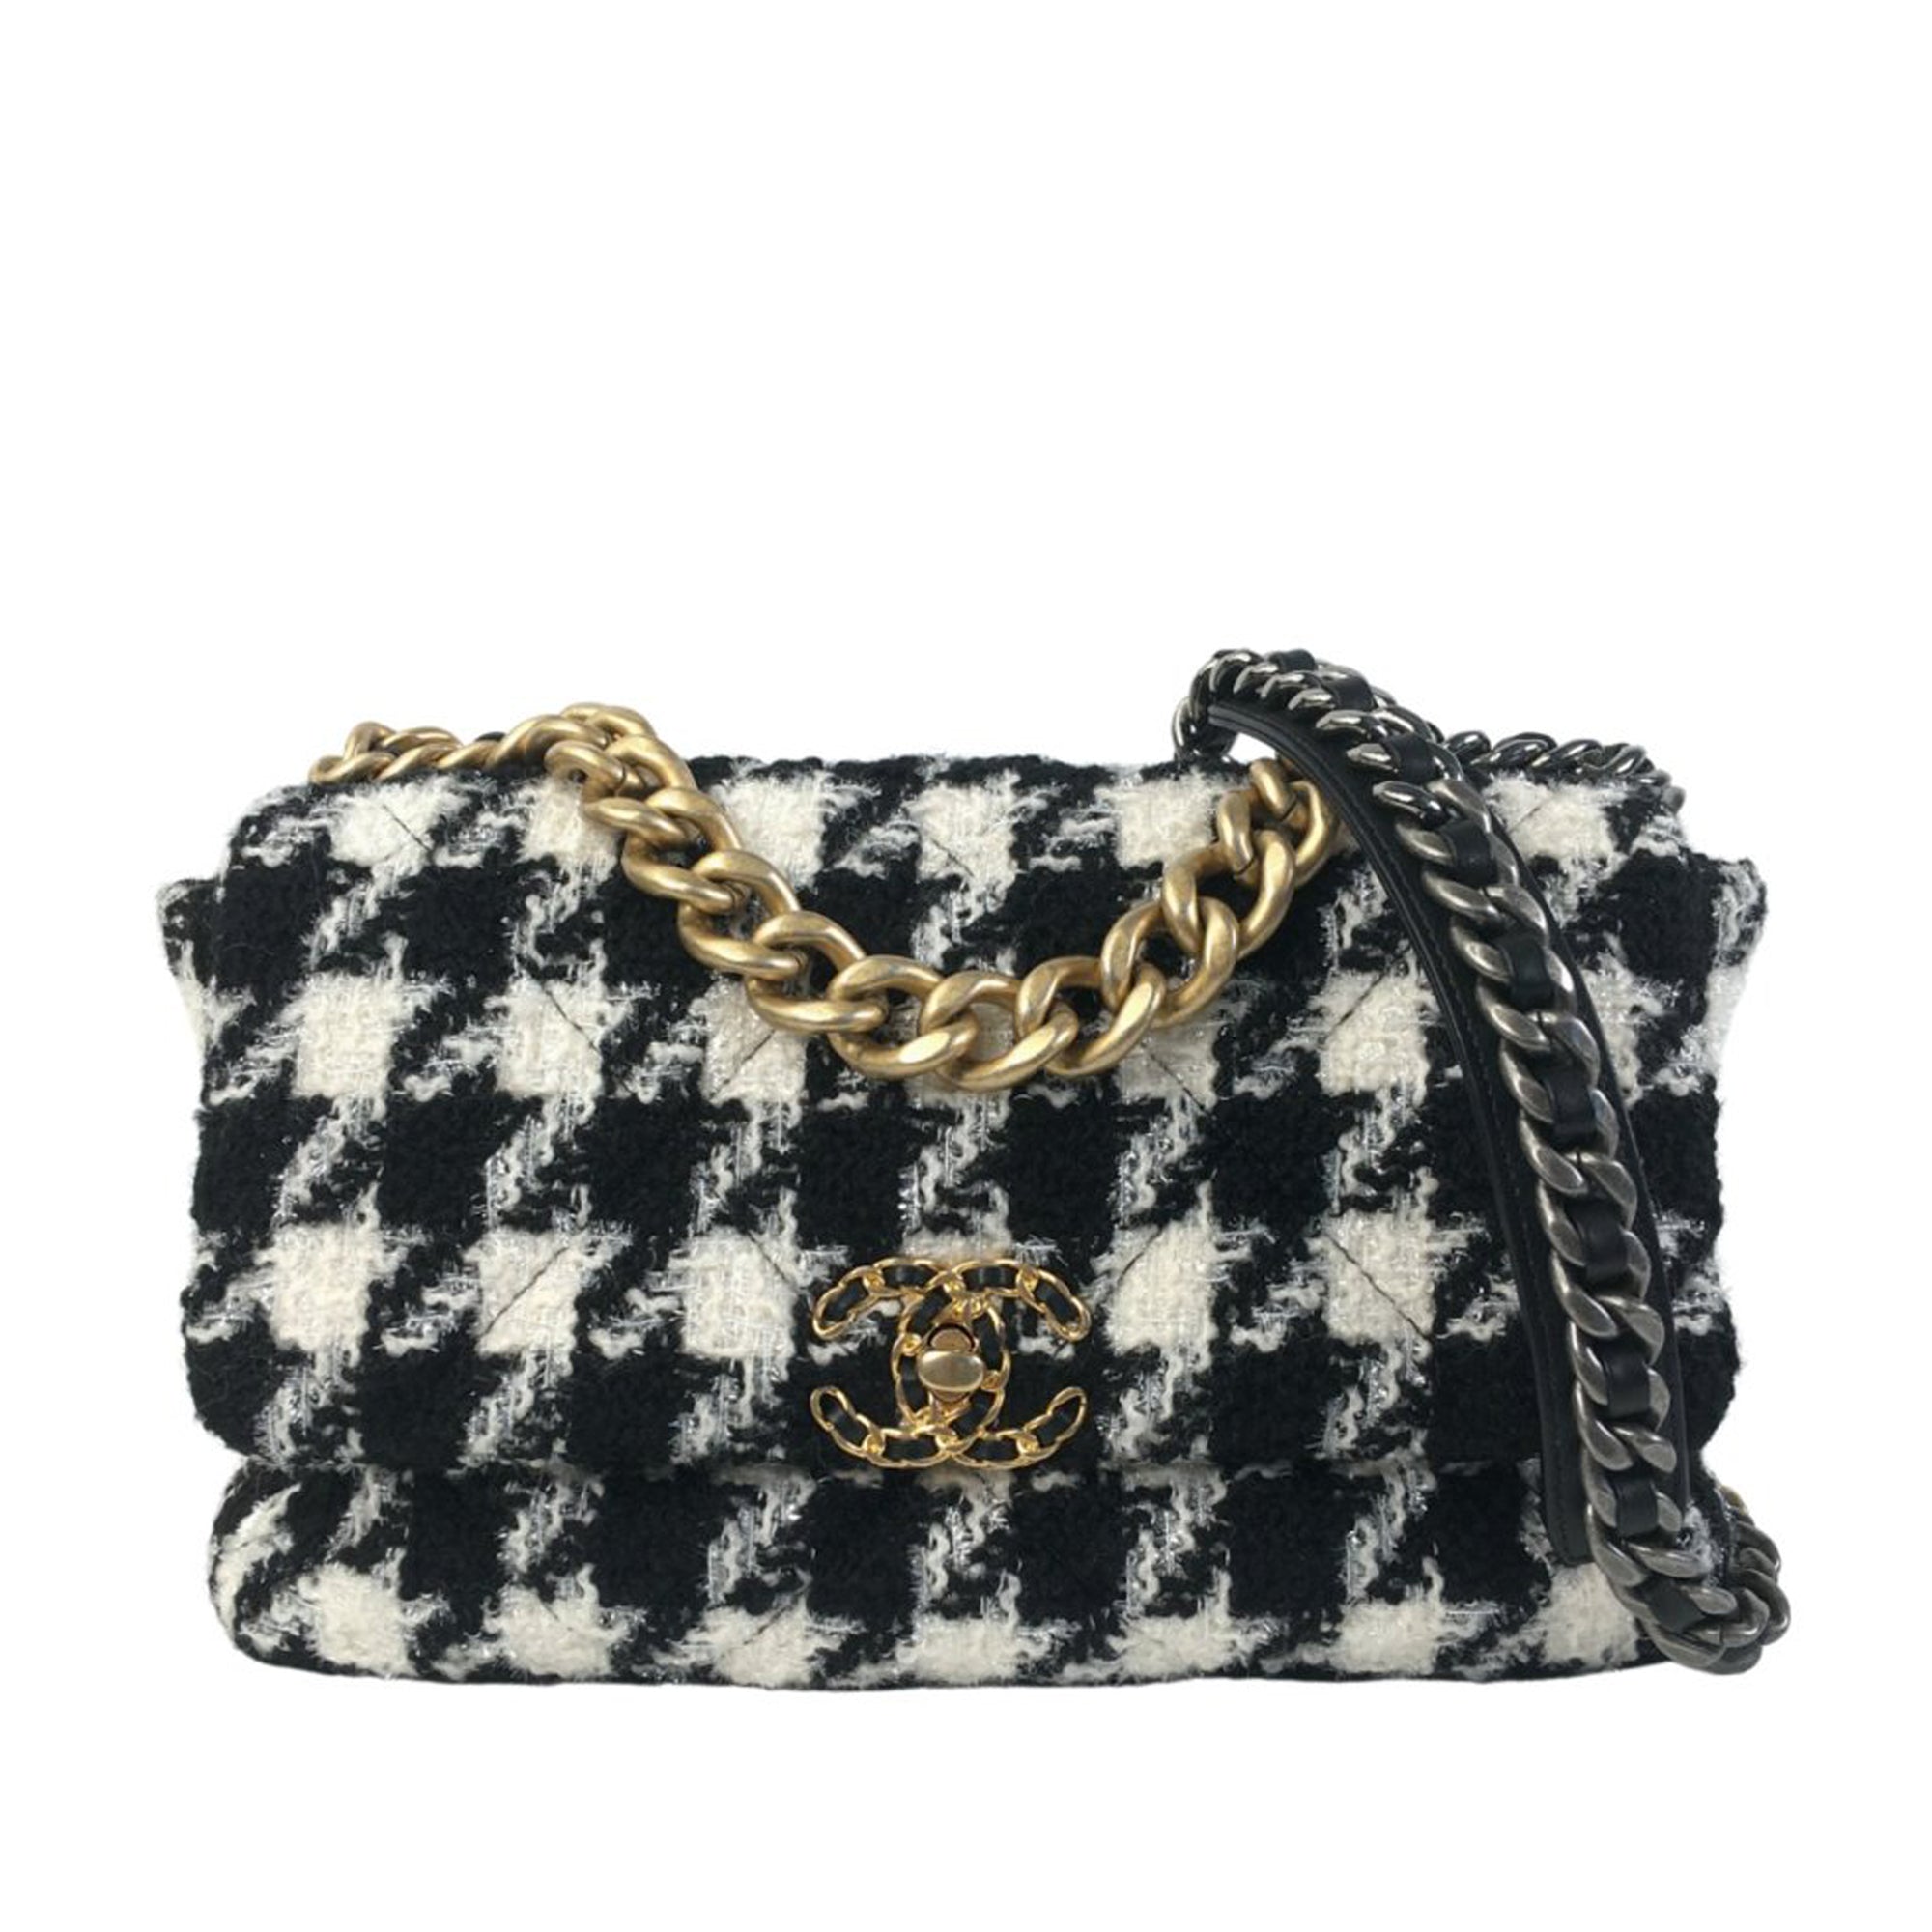 Buy pre-owned CHANEL Maxi 19 Flap Bag Black/White Tweed